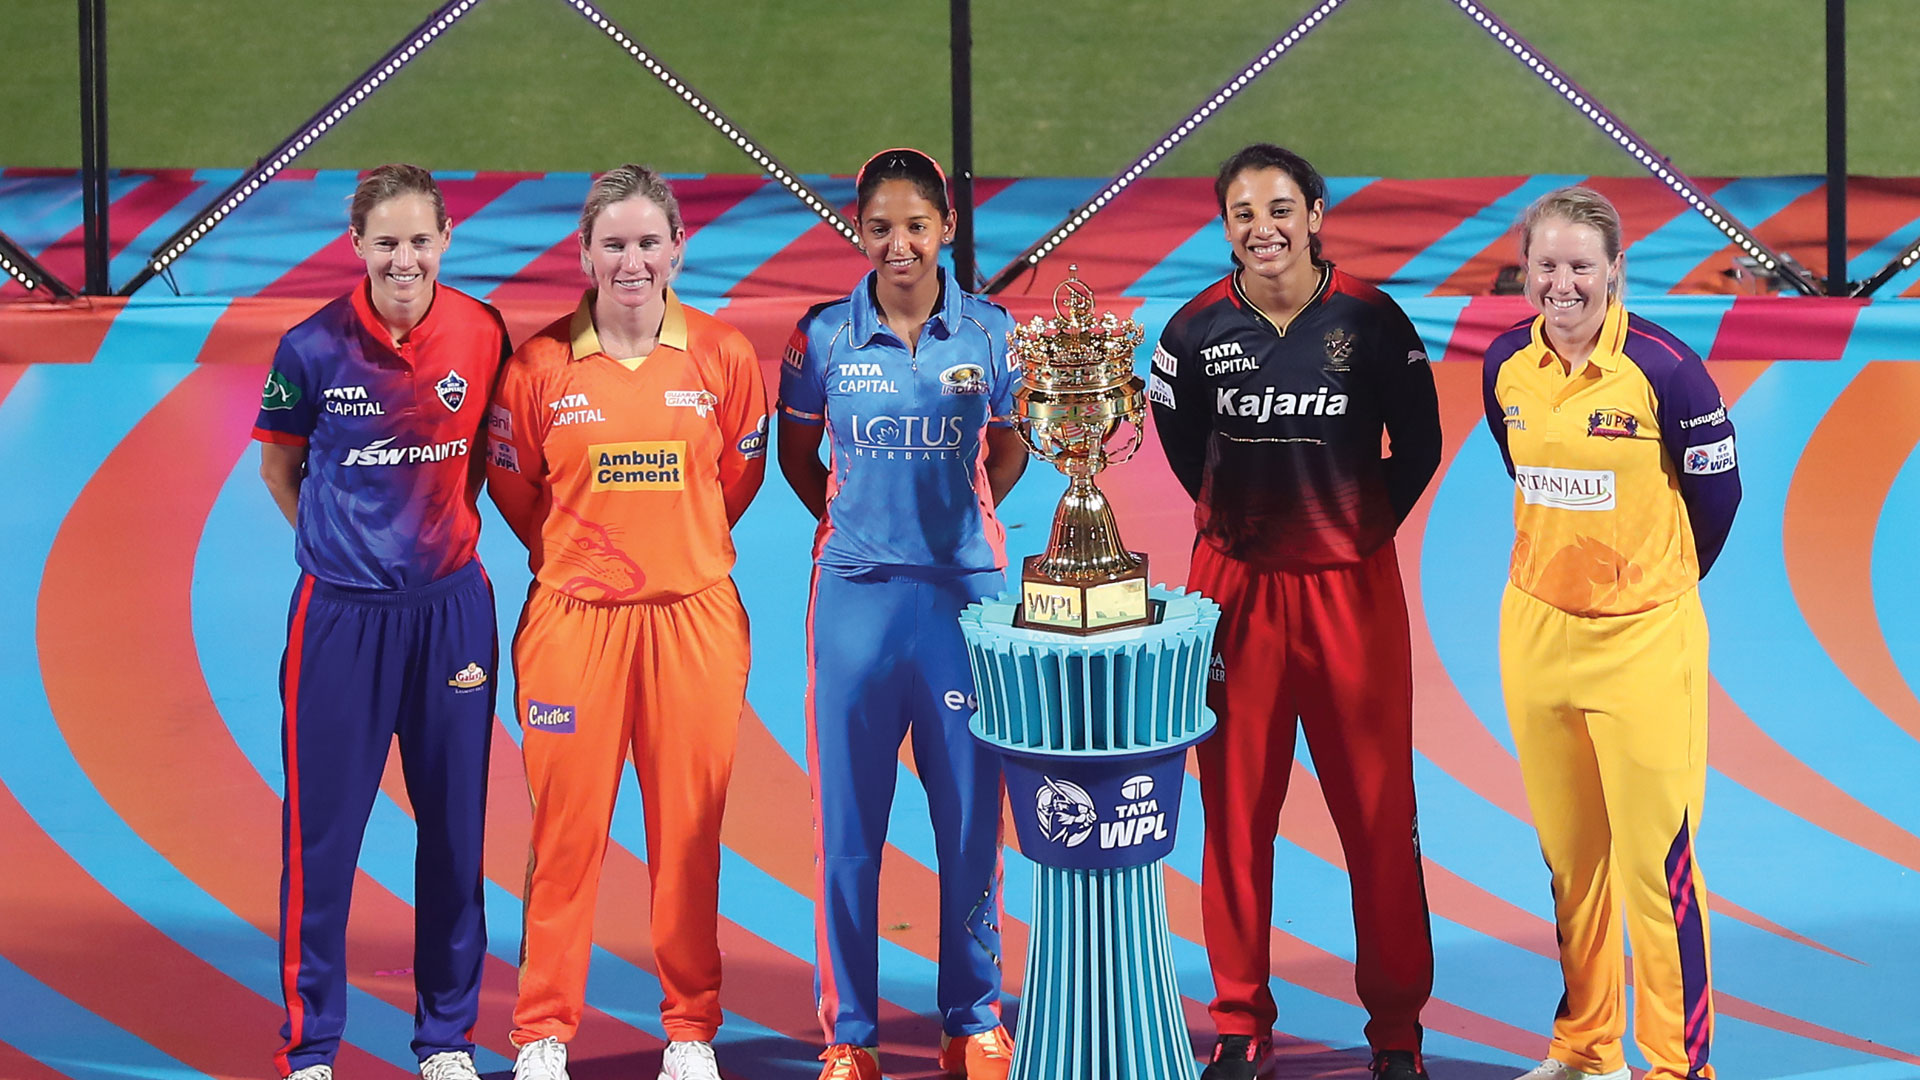 A column by Harish Bhat on the Tata group's support of WPL, Women's Premier League cricket